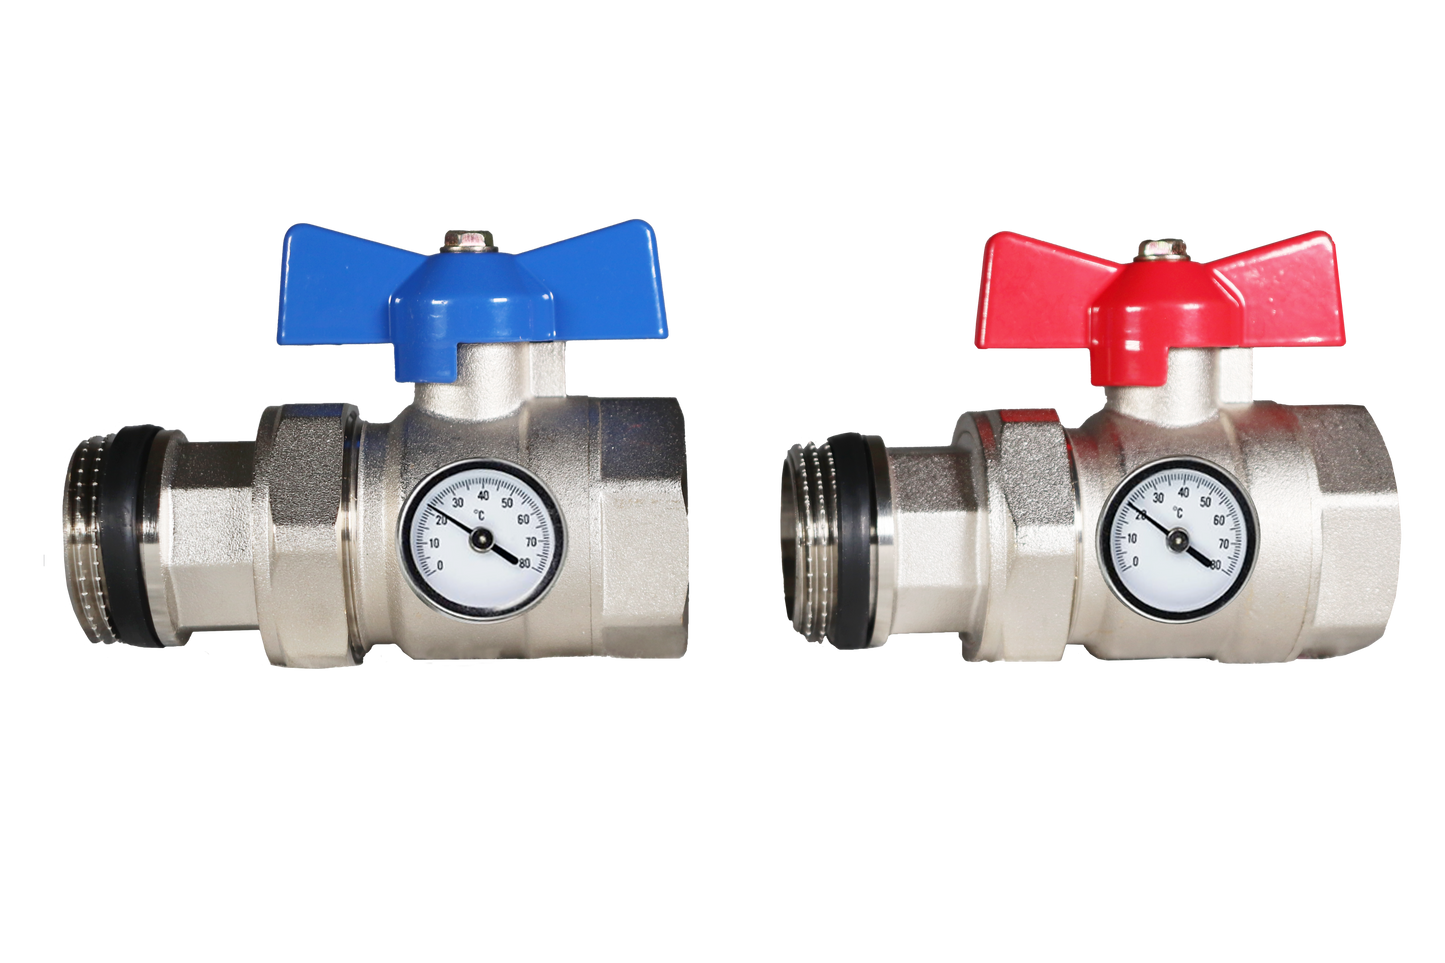 Pair of 1" Isolation Valves With Gauges